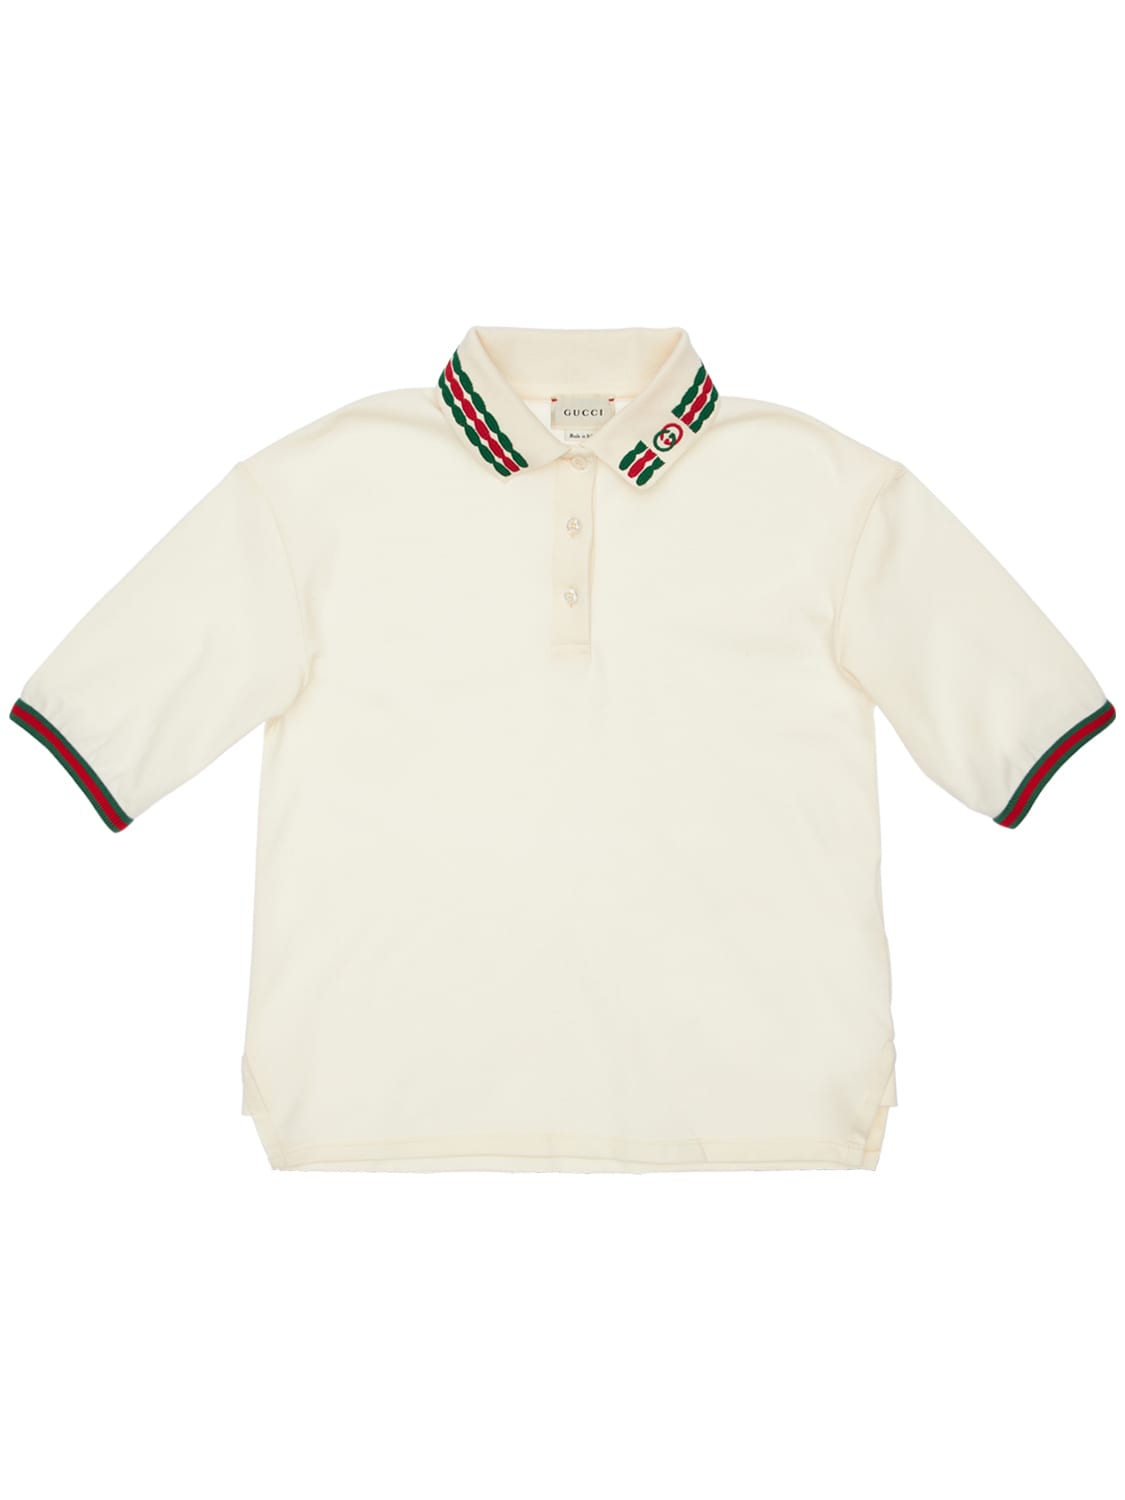 Gucci Kids' Cotton Piquet Polo W/ Embroidery In Ivory